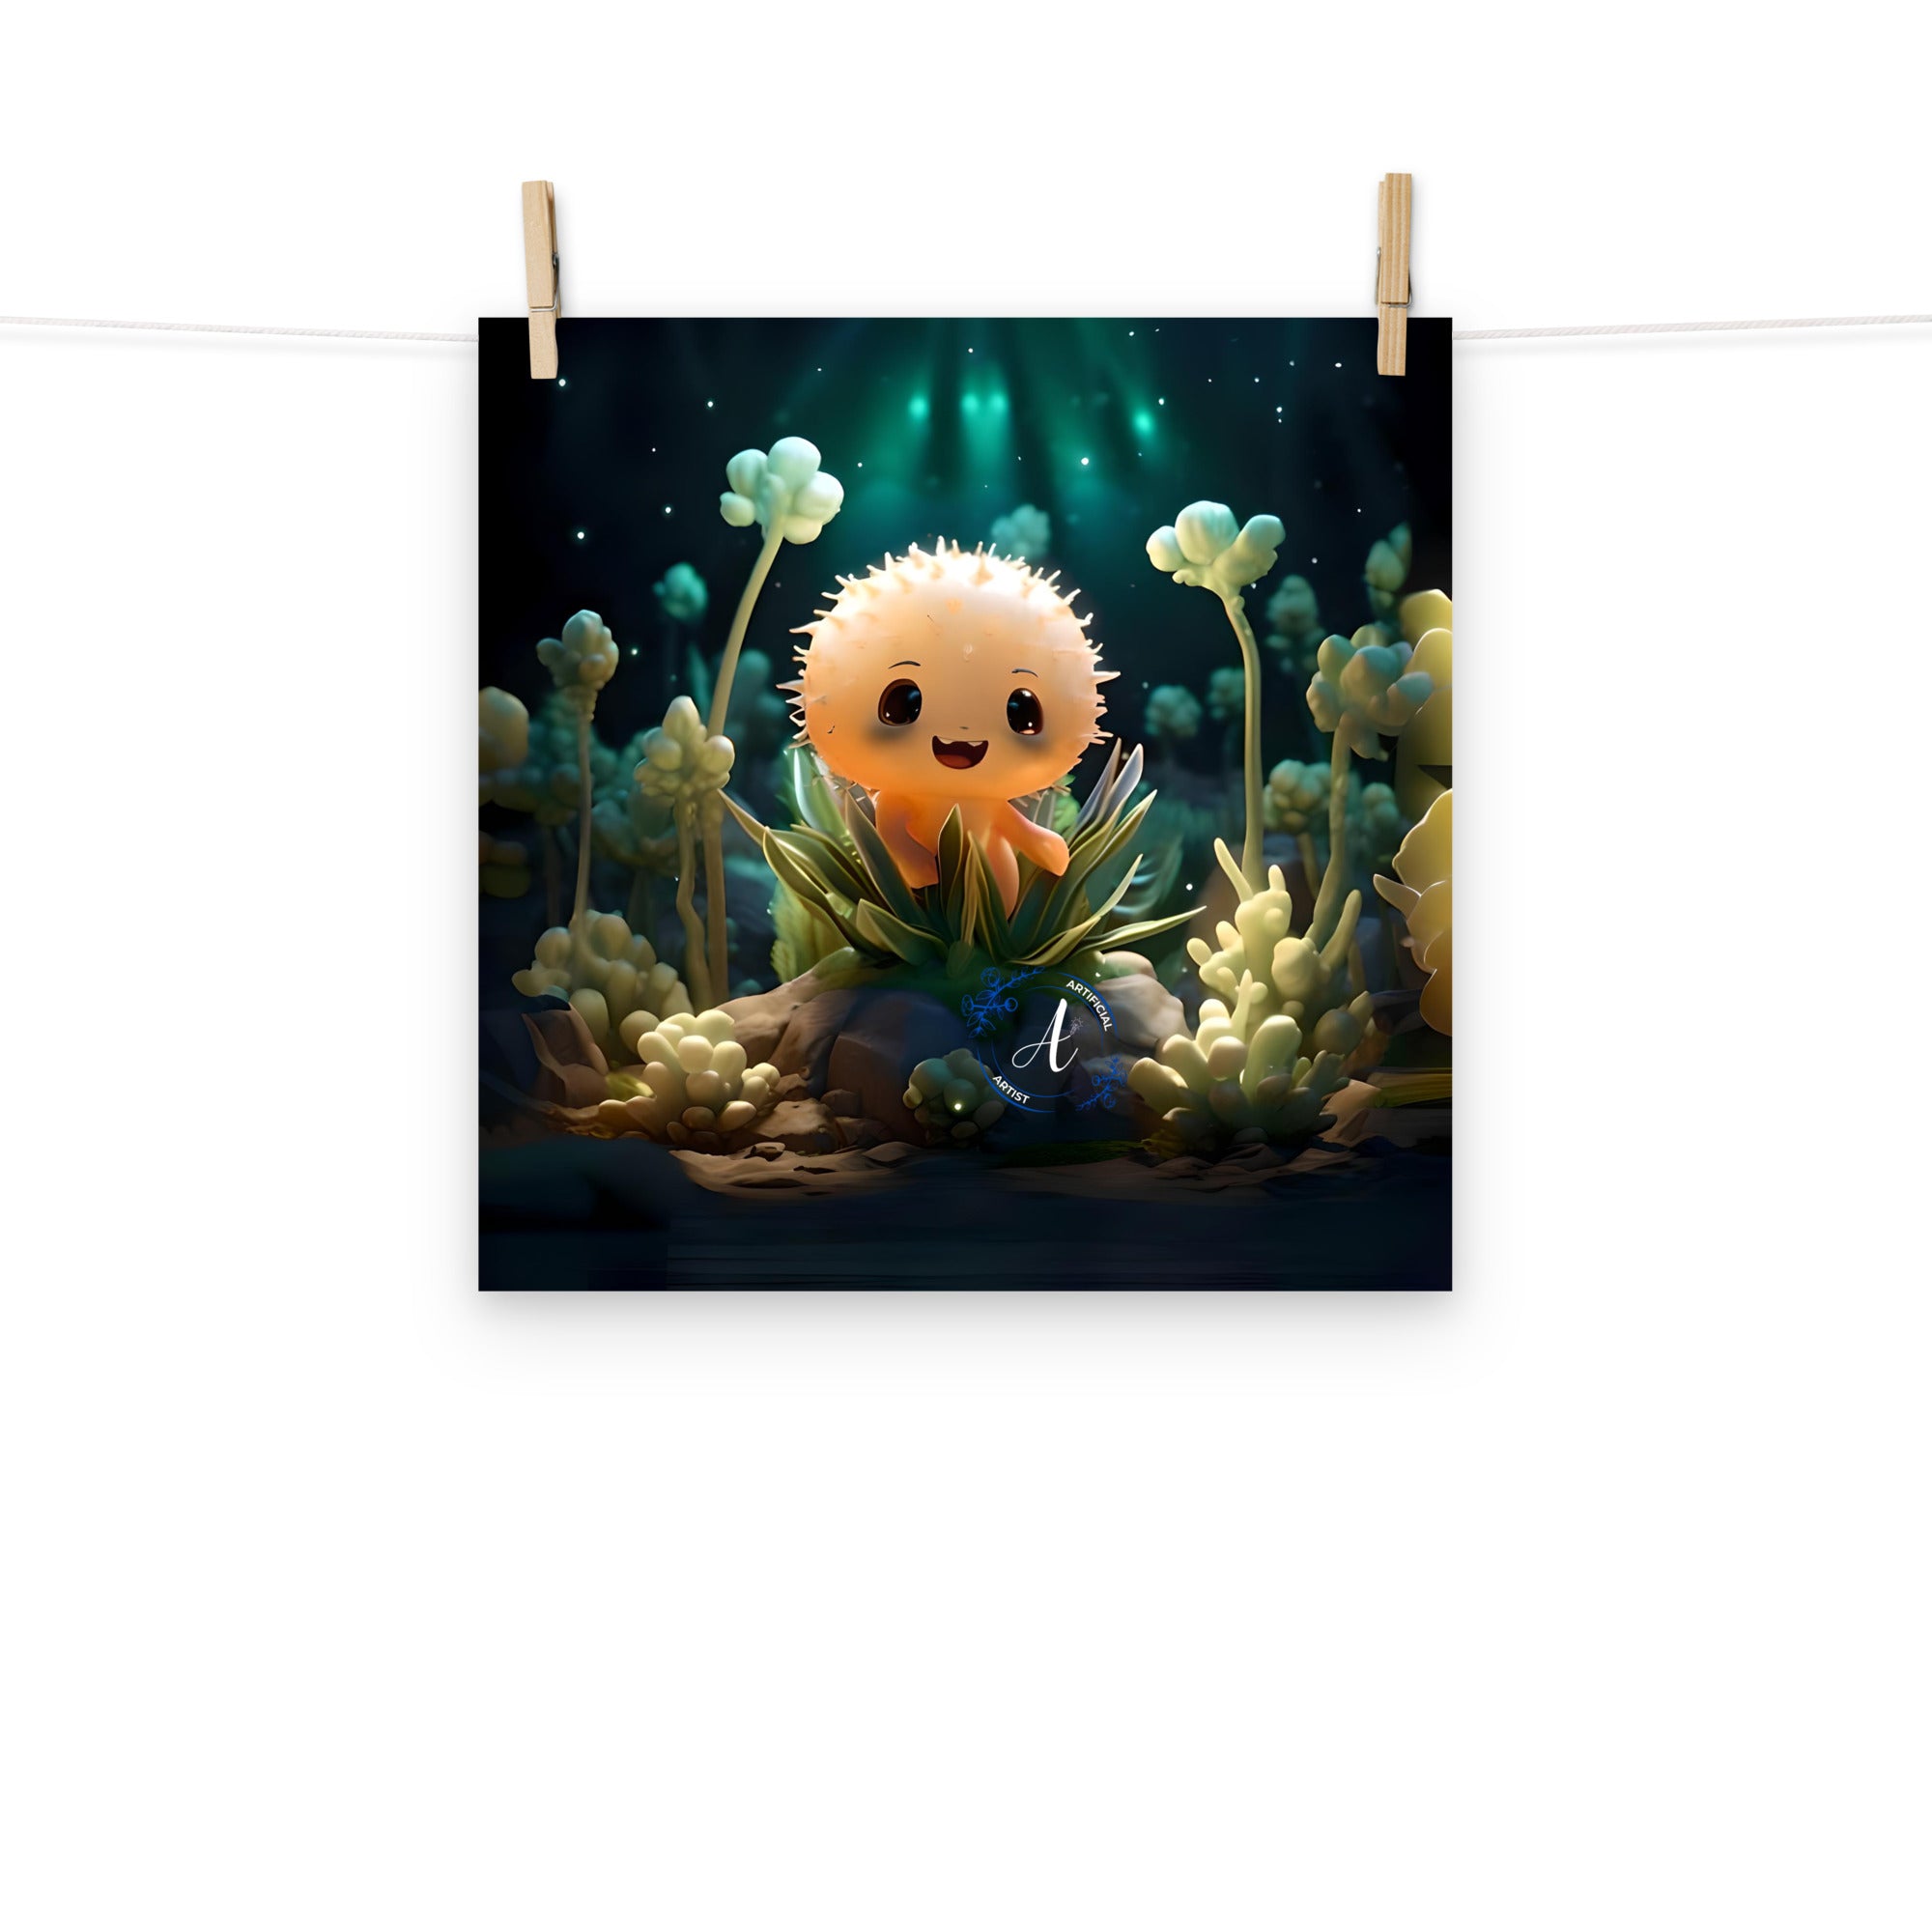 Starry Cactus - Poster